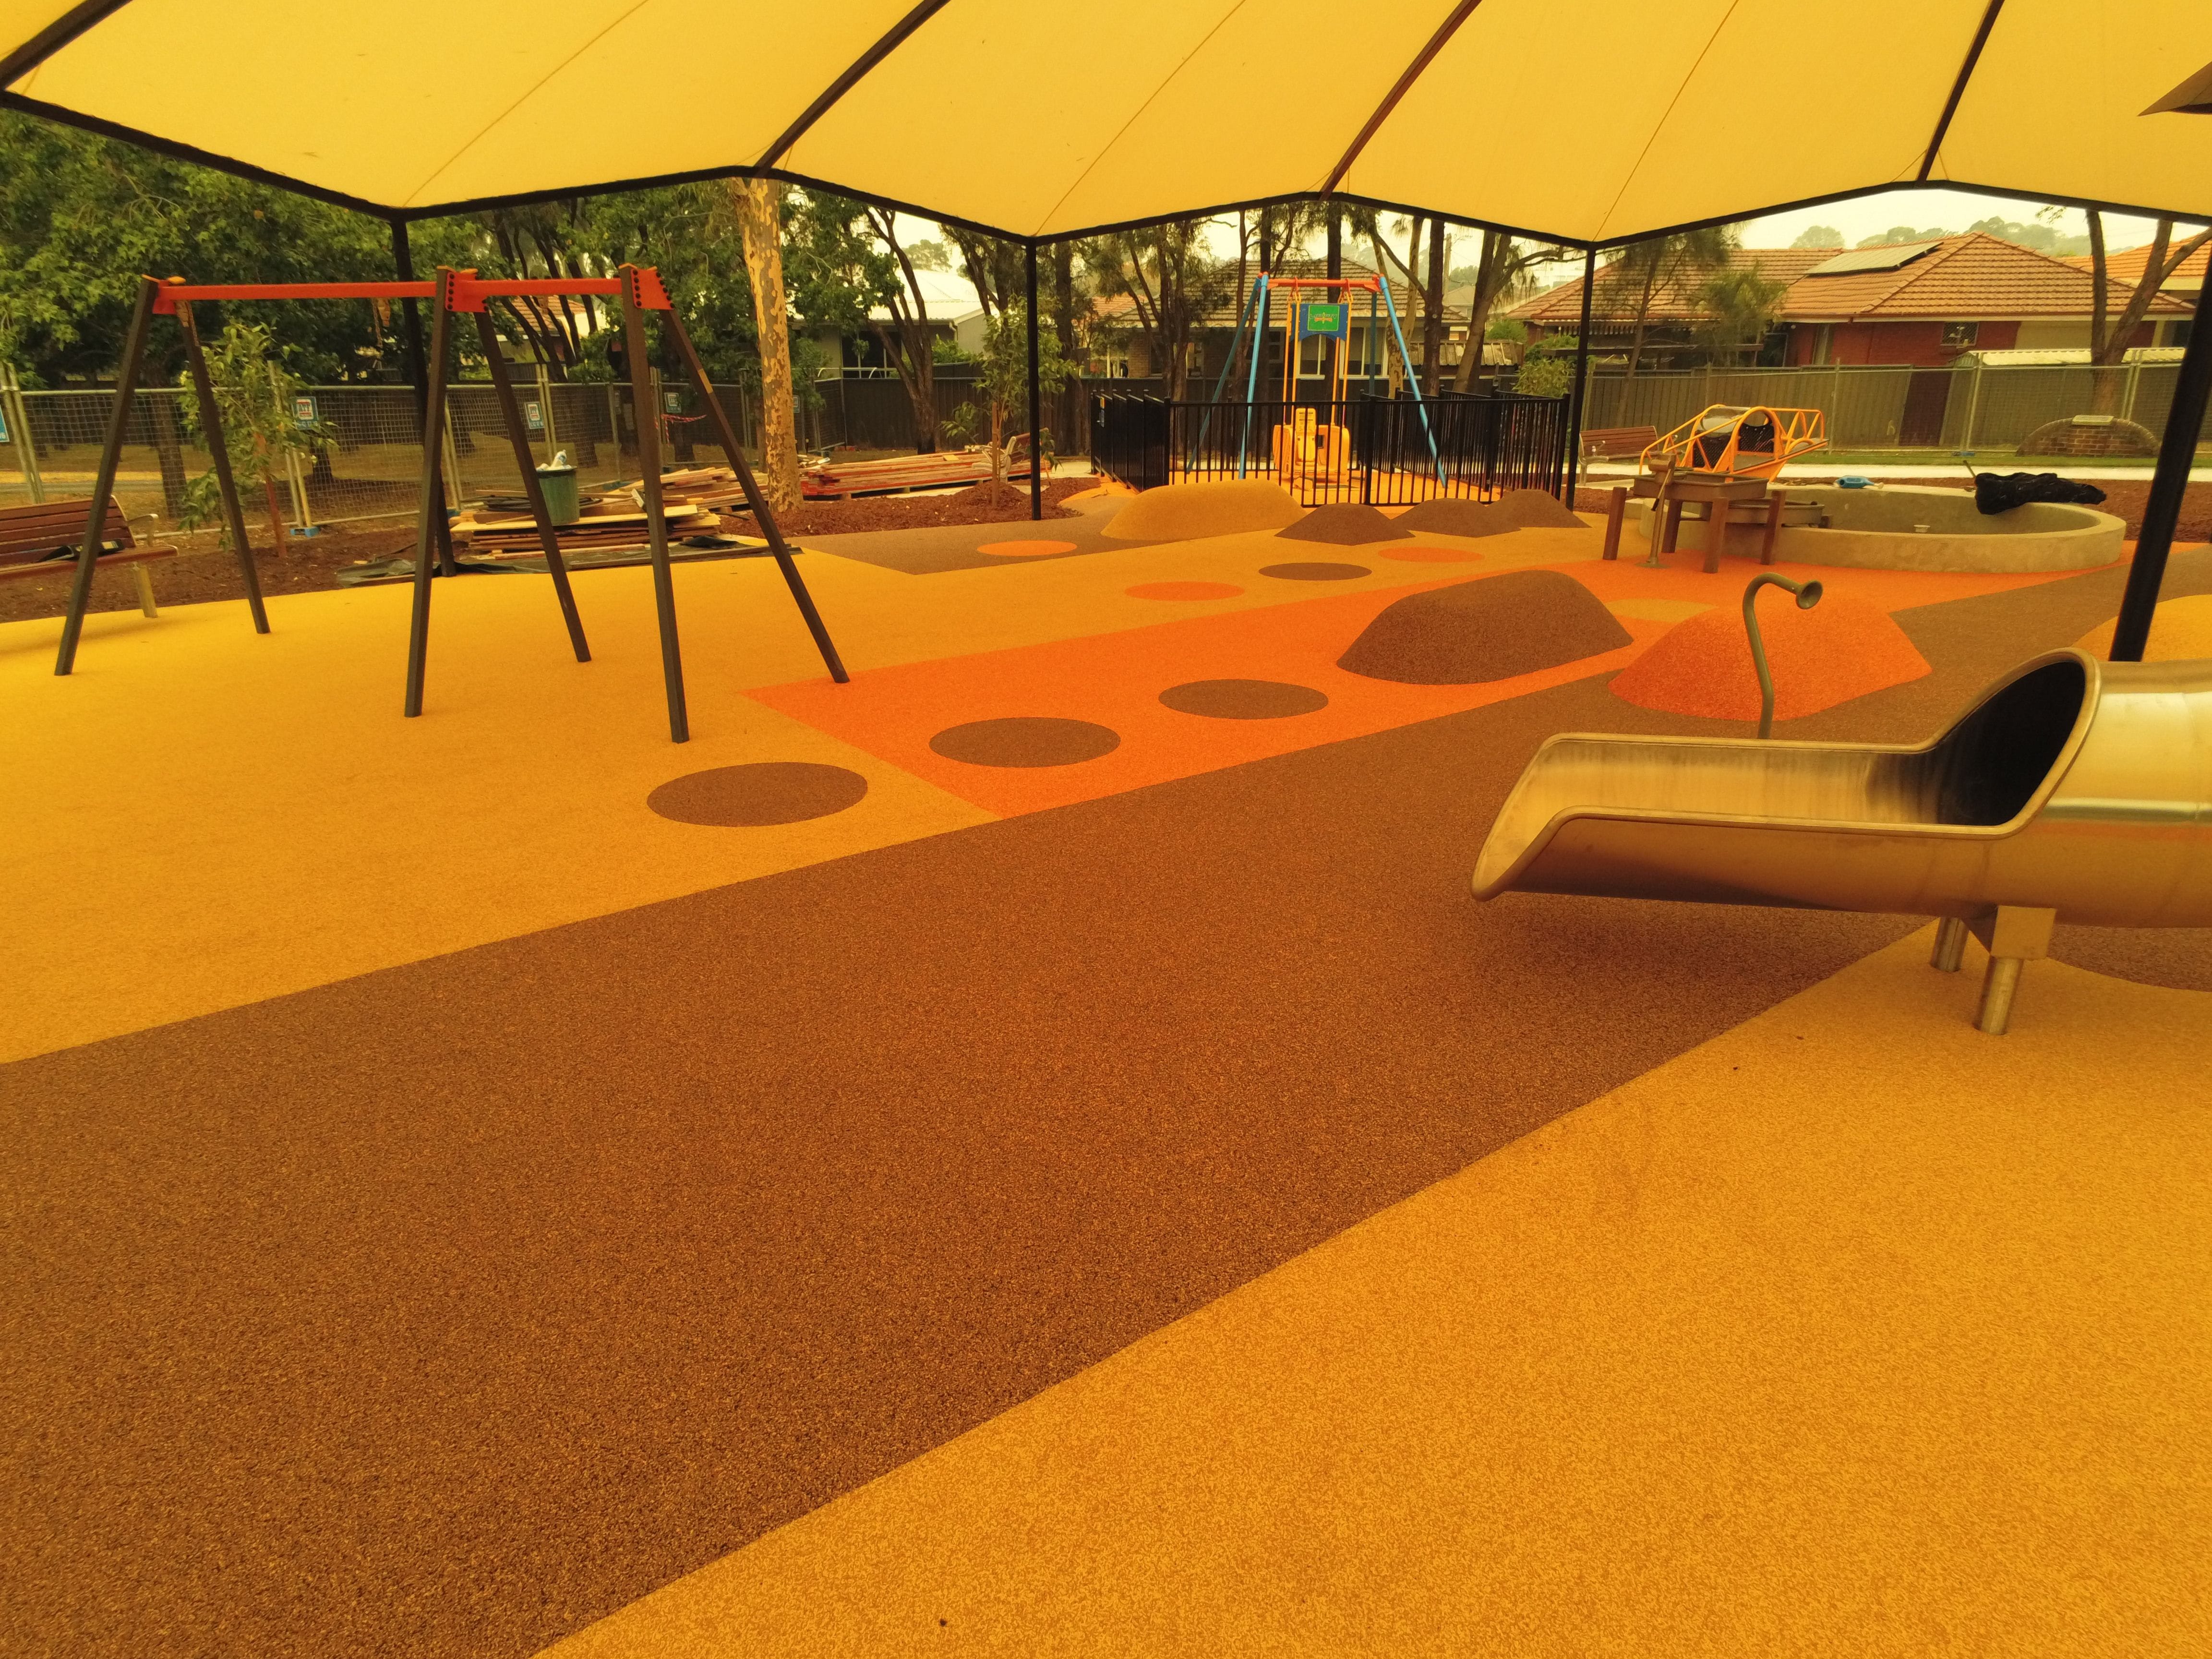 Synthatech Australia - Central Gardens All Ability Playground Image -5e1d2d4ee3cea